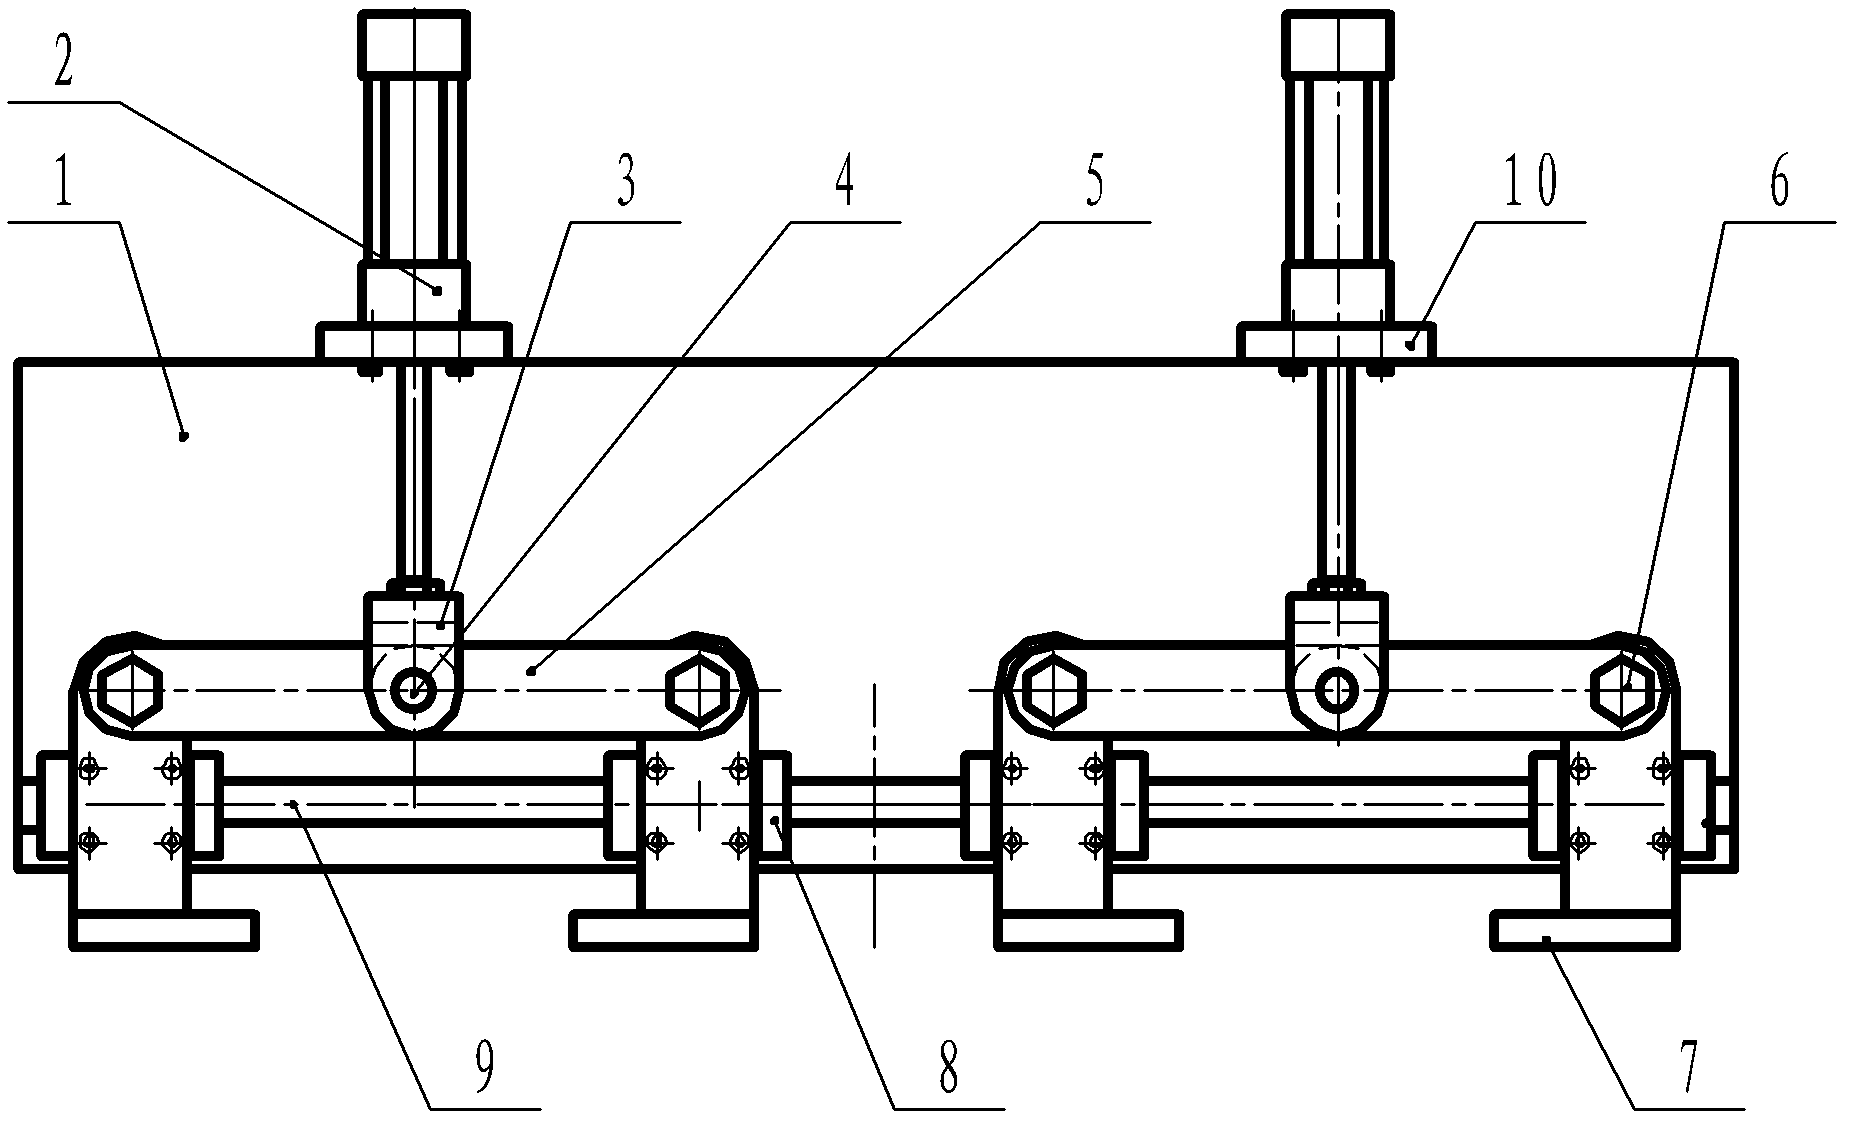 Automatic positioning clamping mechanism for feeding and discharging materials in bell-shaped shell defect-detection/cleaning integrated machine